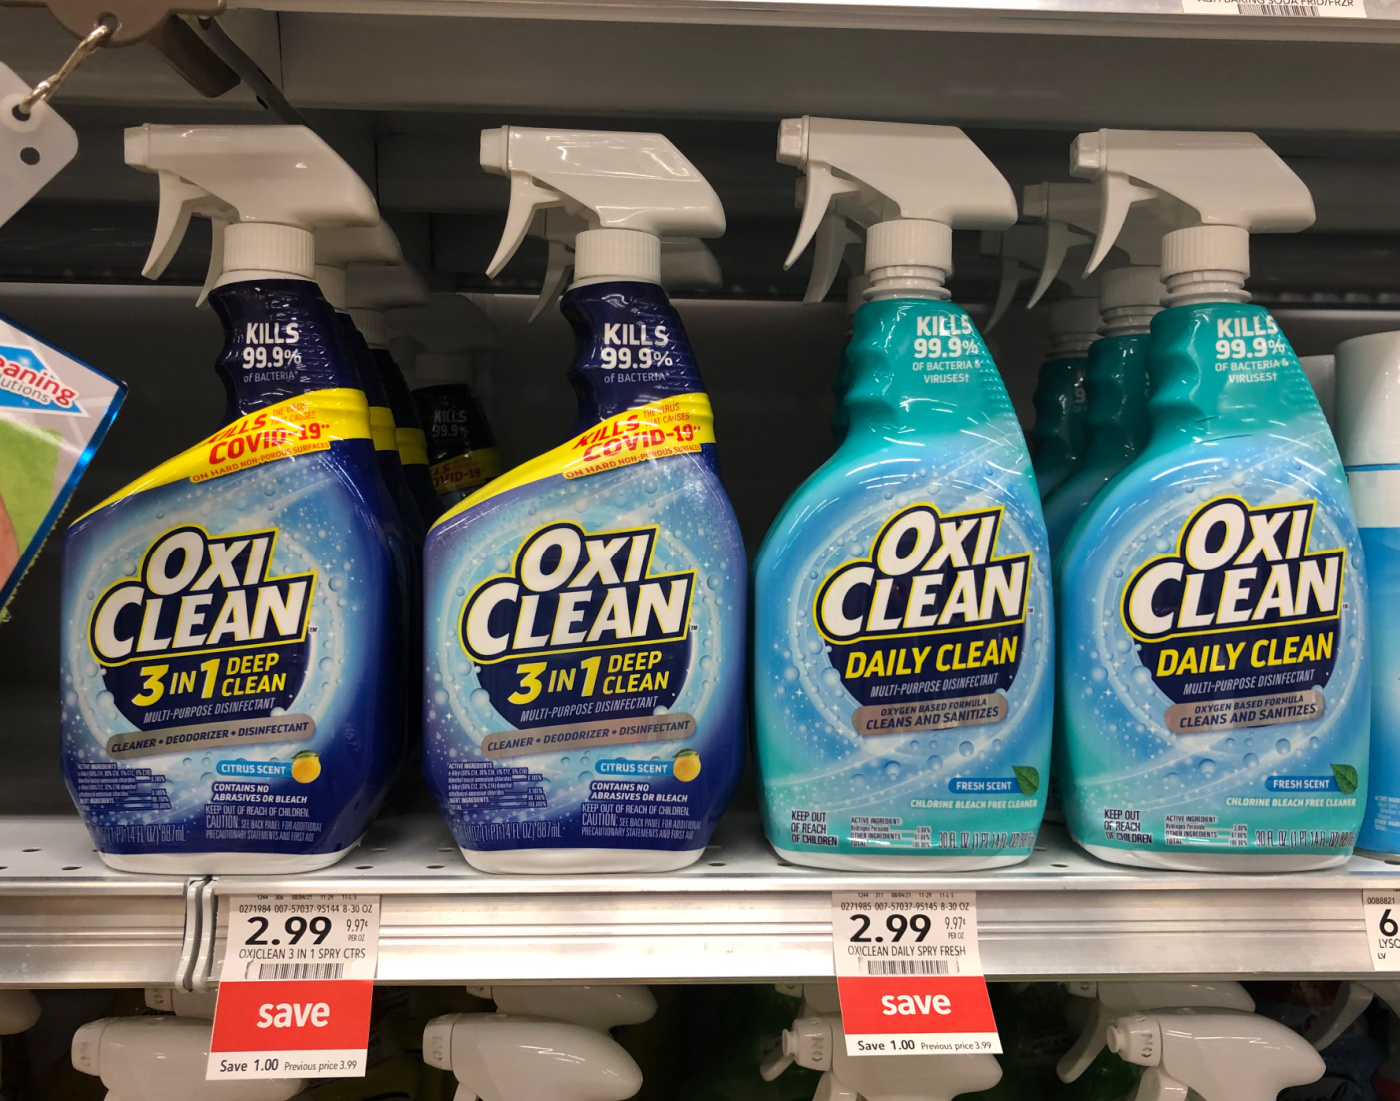 New OxiClean™ Multi-Purpose Disinfectant Cleaners Are Now Available At Publix - Clean & Disinfect Household Surfaces With The Power Of OxiClean™ on I Heart Publix 4